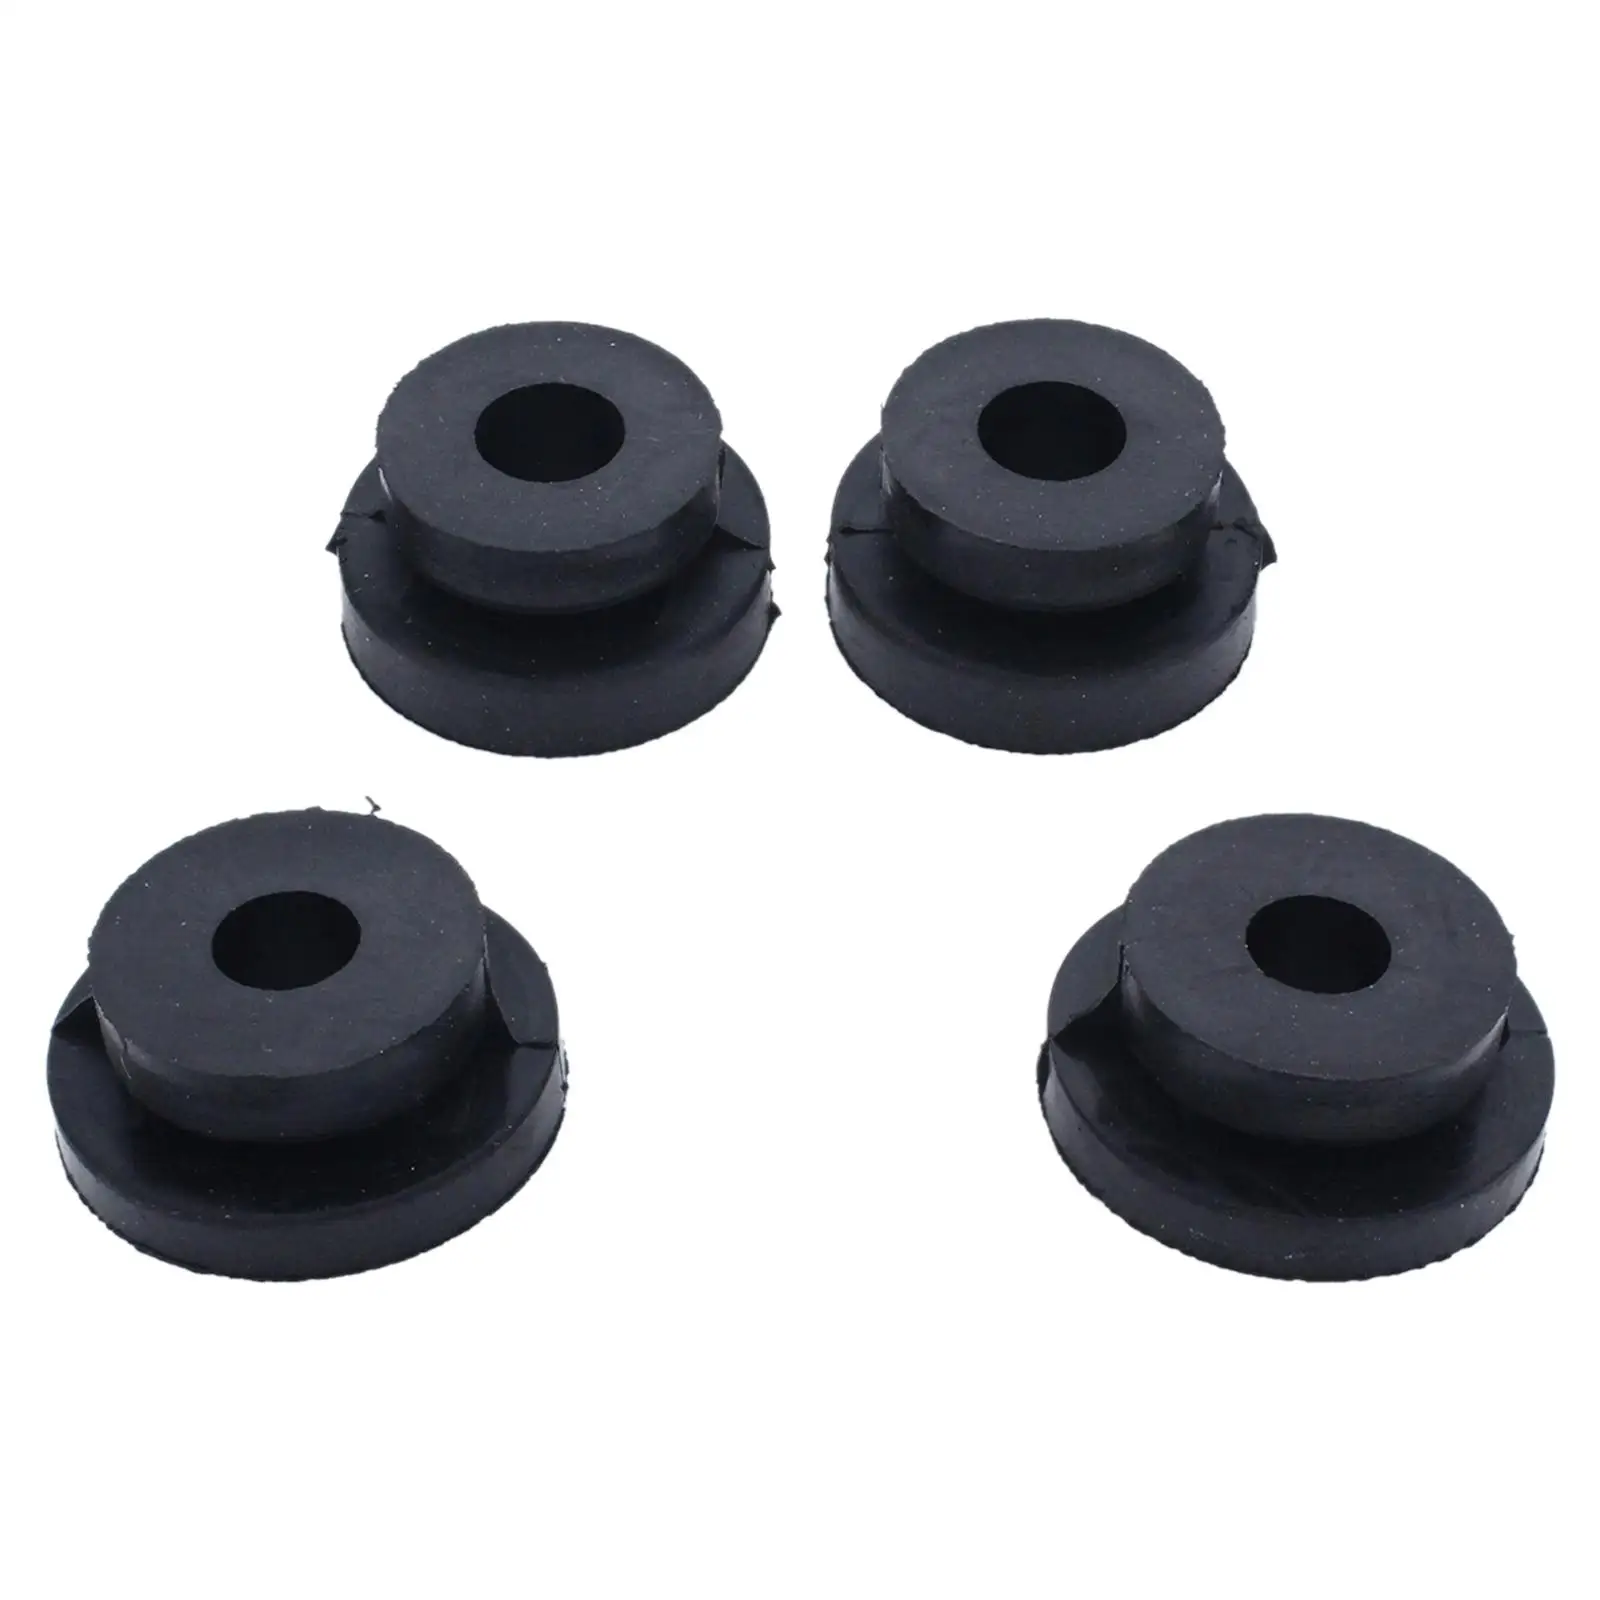 Pack of 4 Car Radiator Rubber Mounting Rubbers 572312 Fits for Defender 200Tdi & 300Tdi Durable Direct Replaces Easy to Install